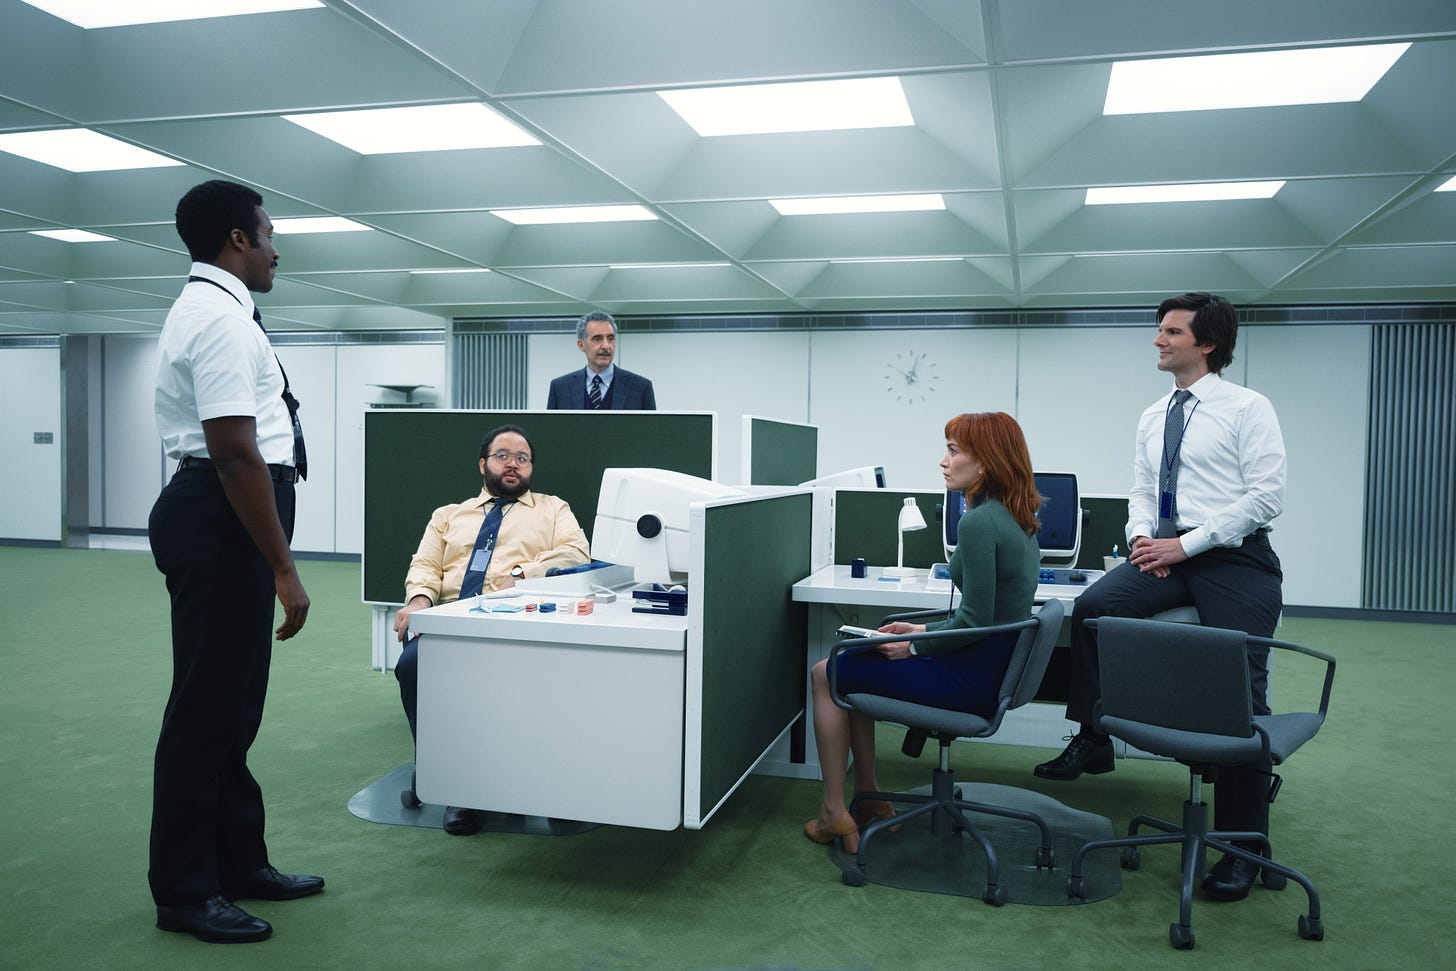 Still image from Severance, showing five officeworkers in a sparse, 70s-style office. The computer monitors are so deep they take up half the desk. Green partitions separate the four desks.